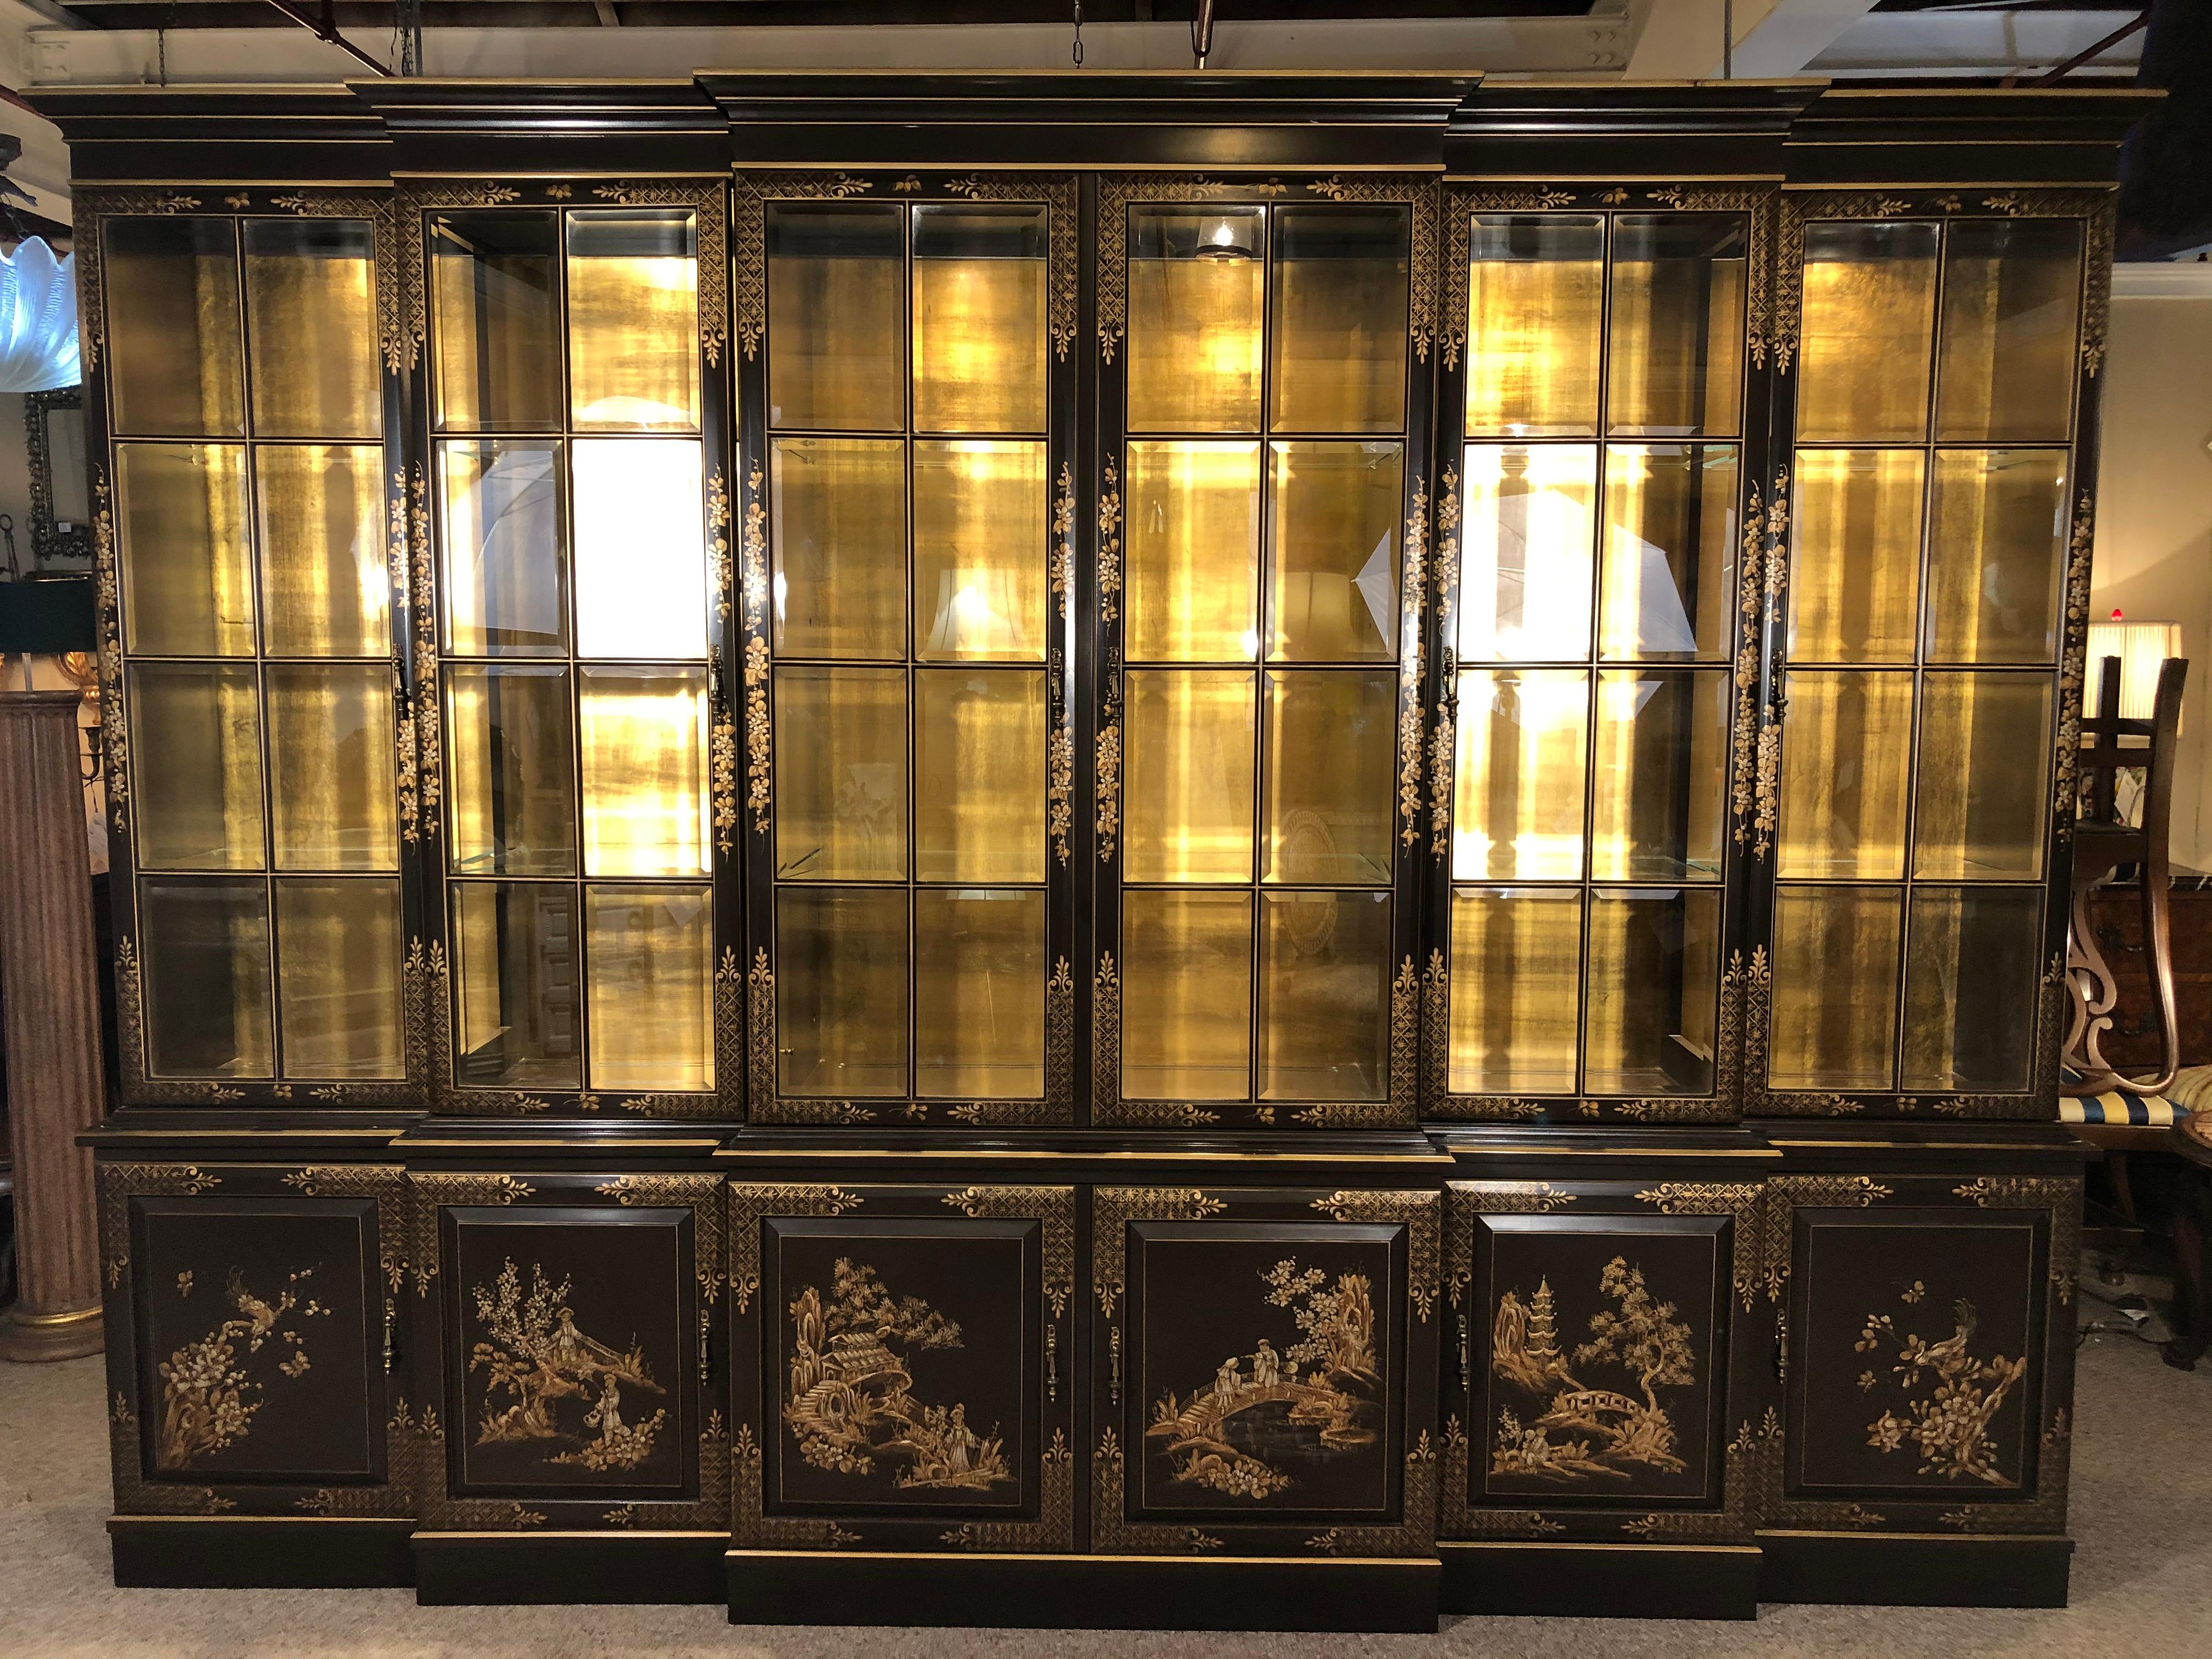 Chinoiserie decorated breakfront bookcase cabinet. An almost ebony chocolate background and design decorated Chinoiserie style breakfront or bookcase cabinet. Having 6 parts with multiple adjustable glass shelves and beveled glass paneled doors.